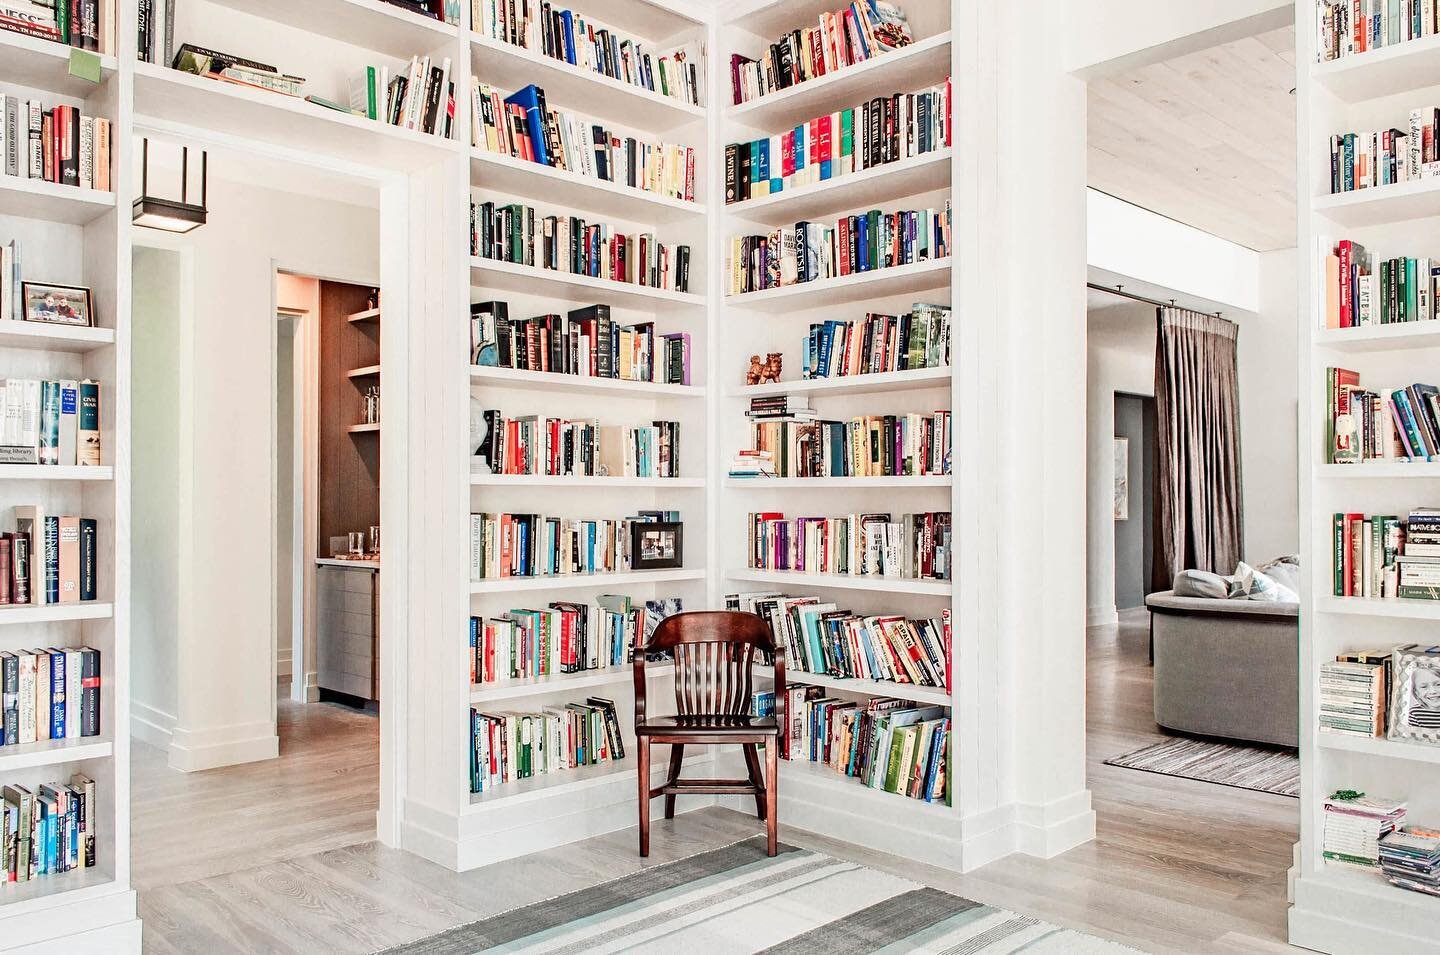 This light and airy library puts us in the mood for spring! Photo by @fenwickhome